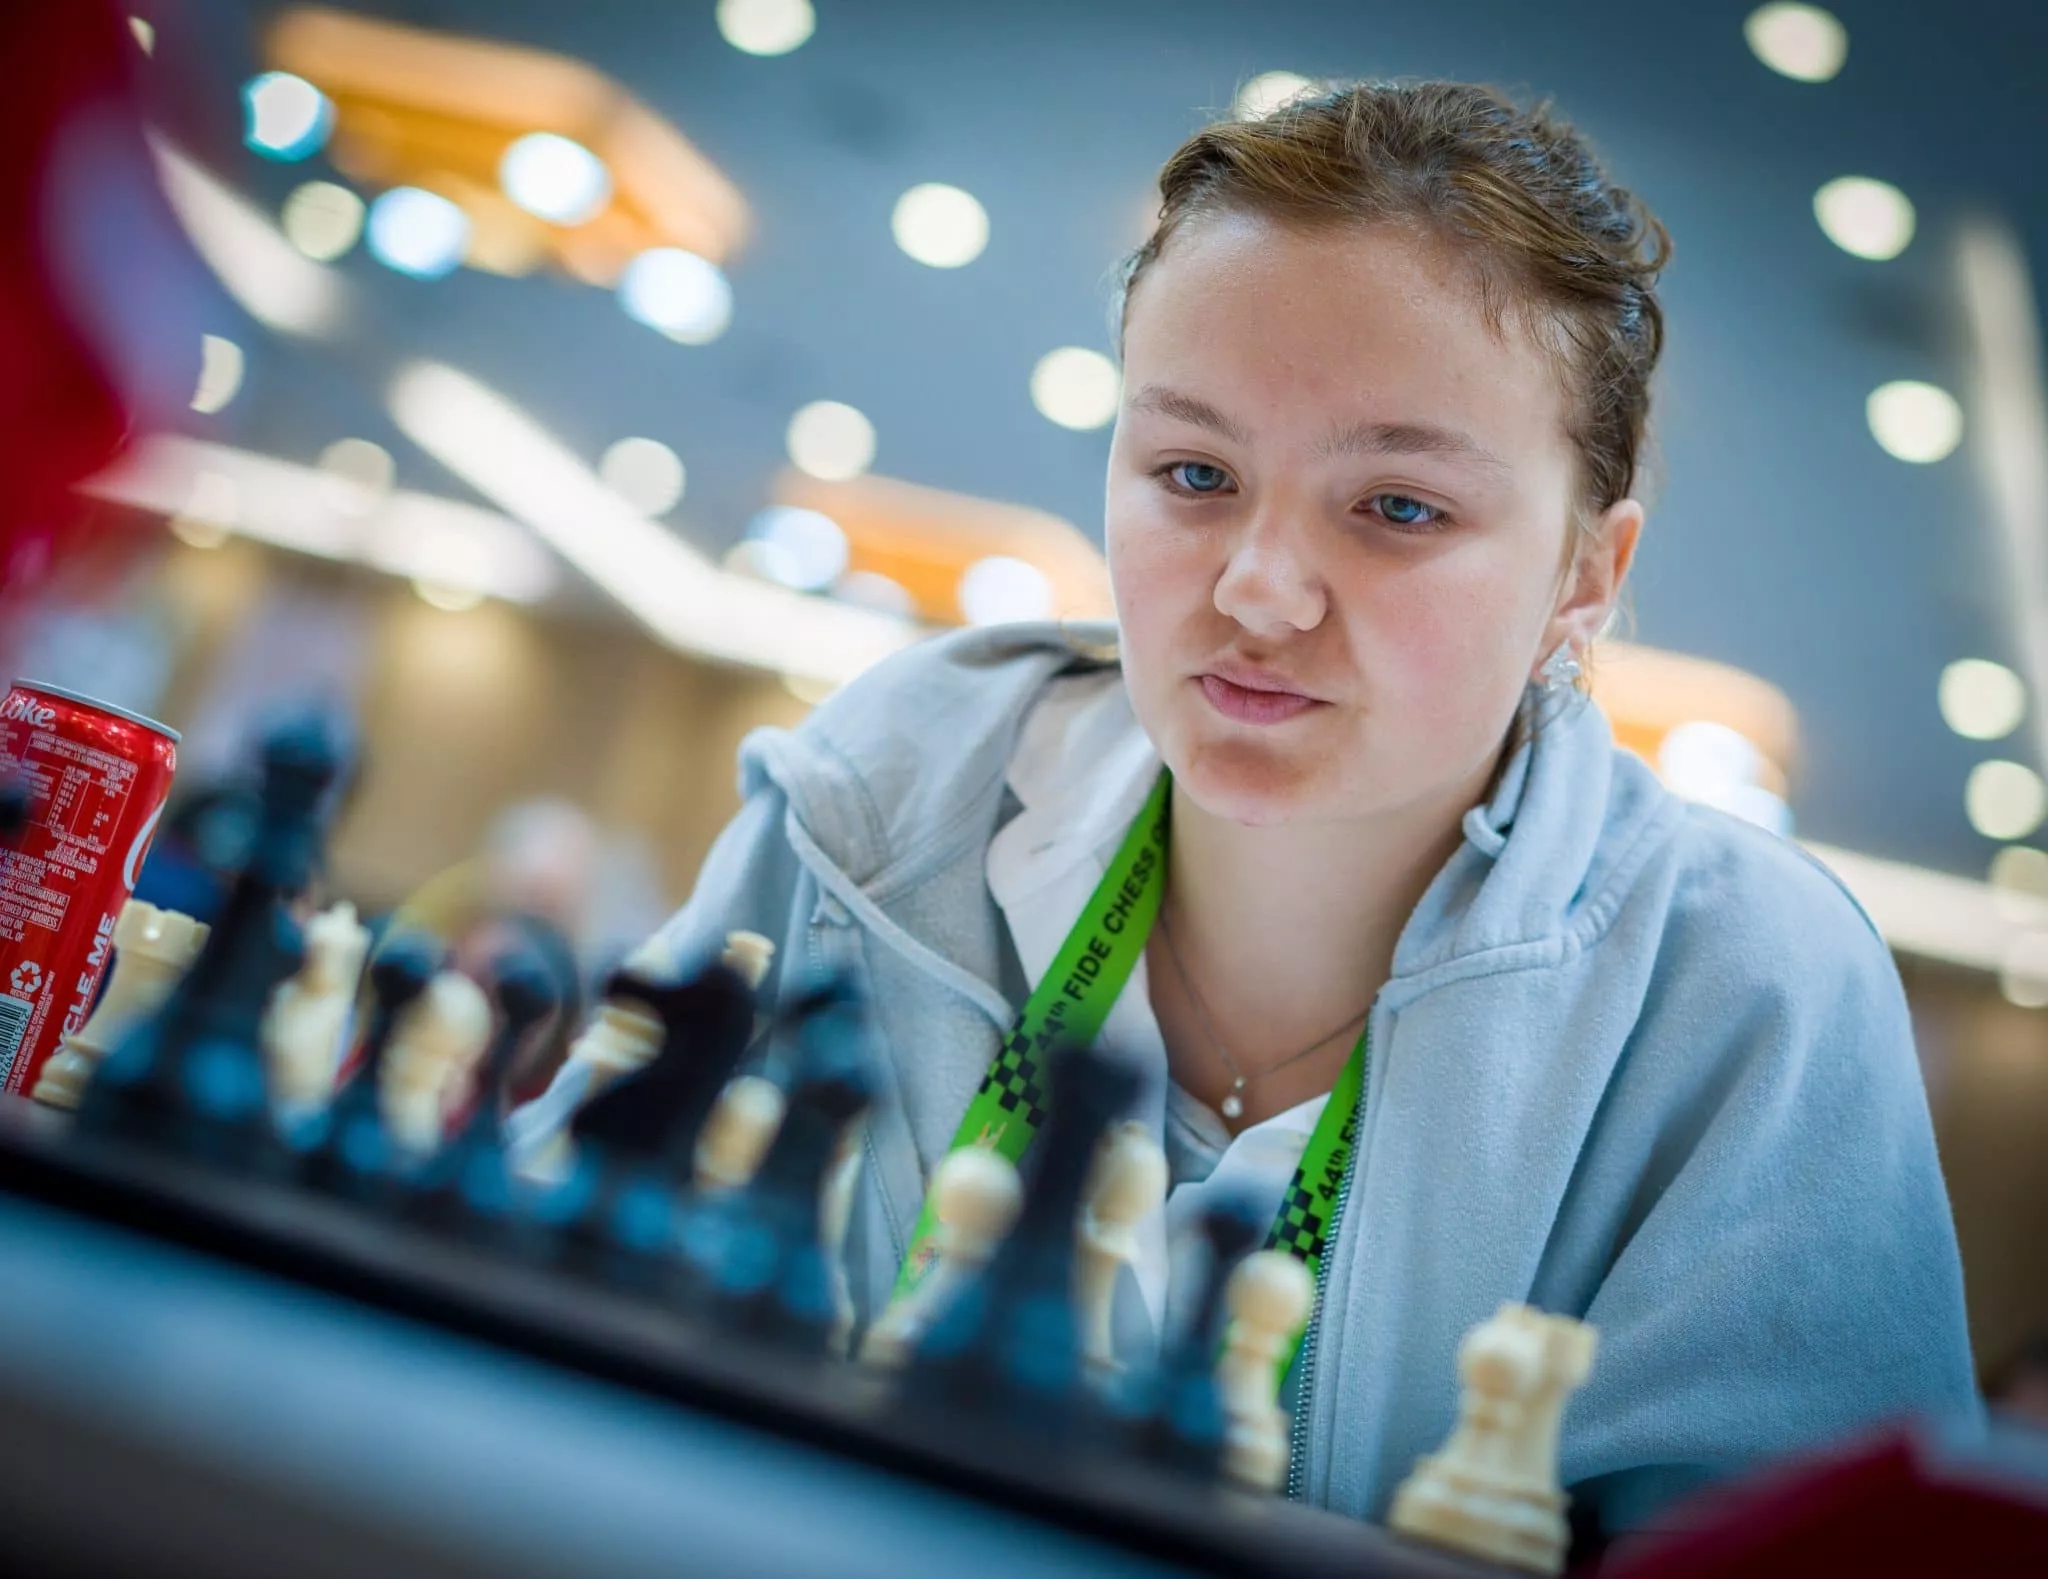 The Greatest Female Chess Player Of All Time? - Chessable Blog